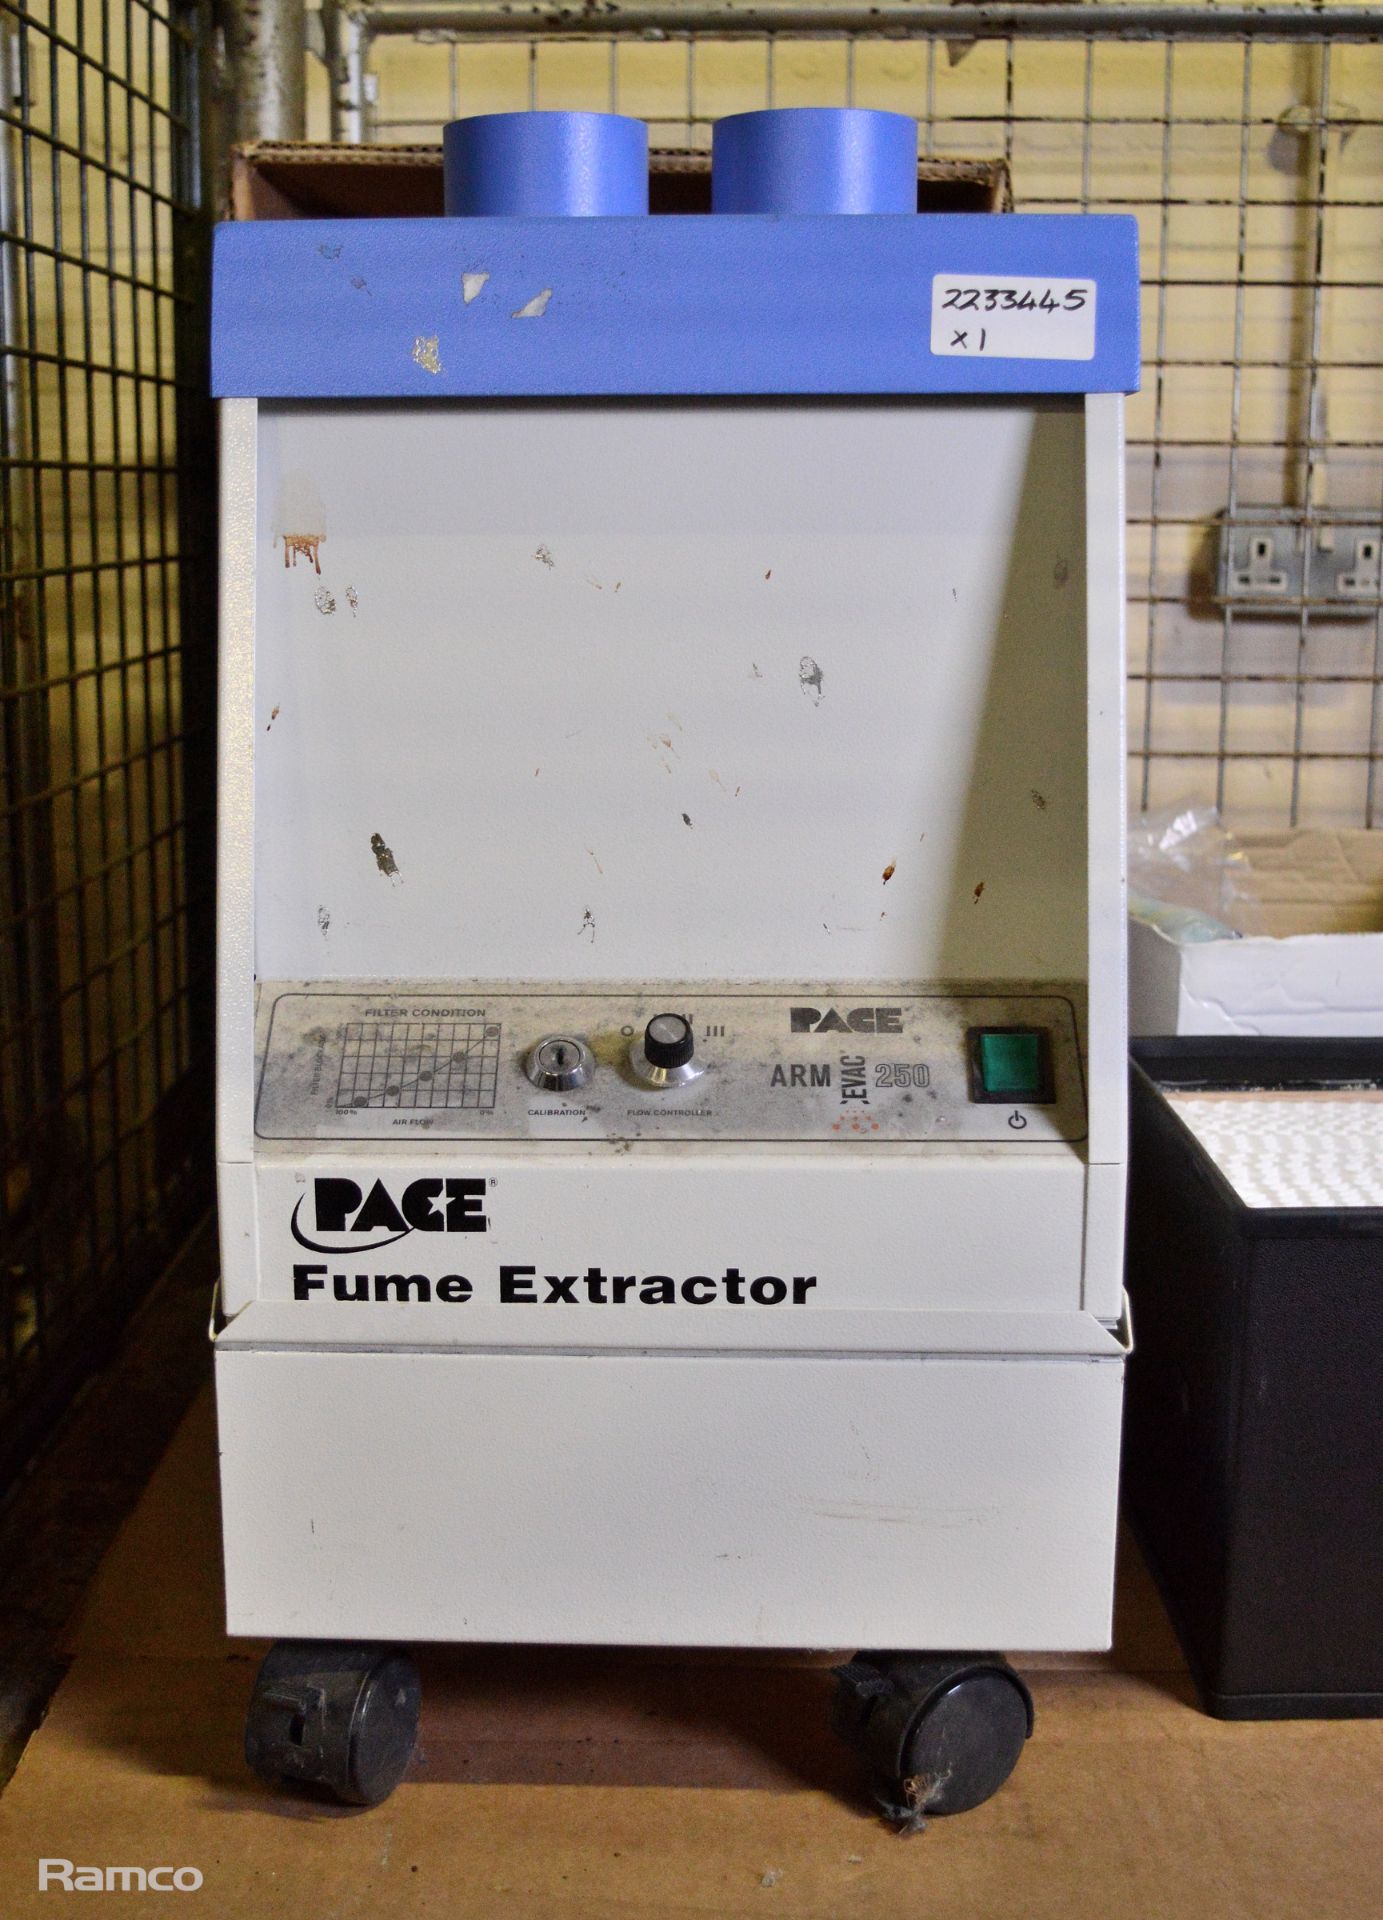 Pace Arm Evac 250 fume extractor unit with attachments - Image 2 of 6